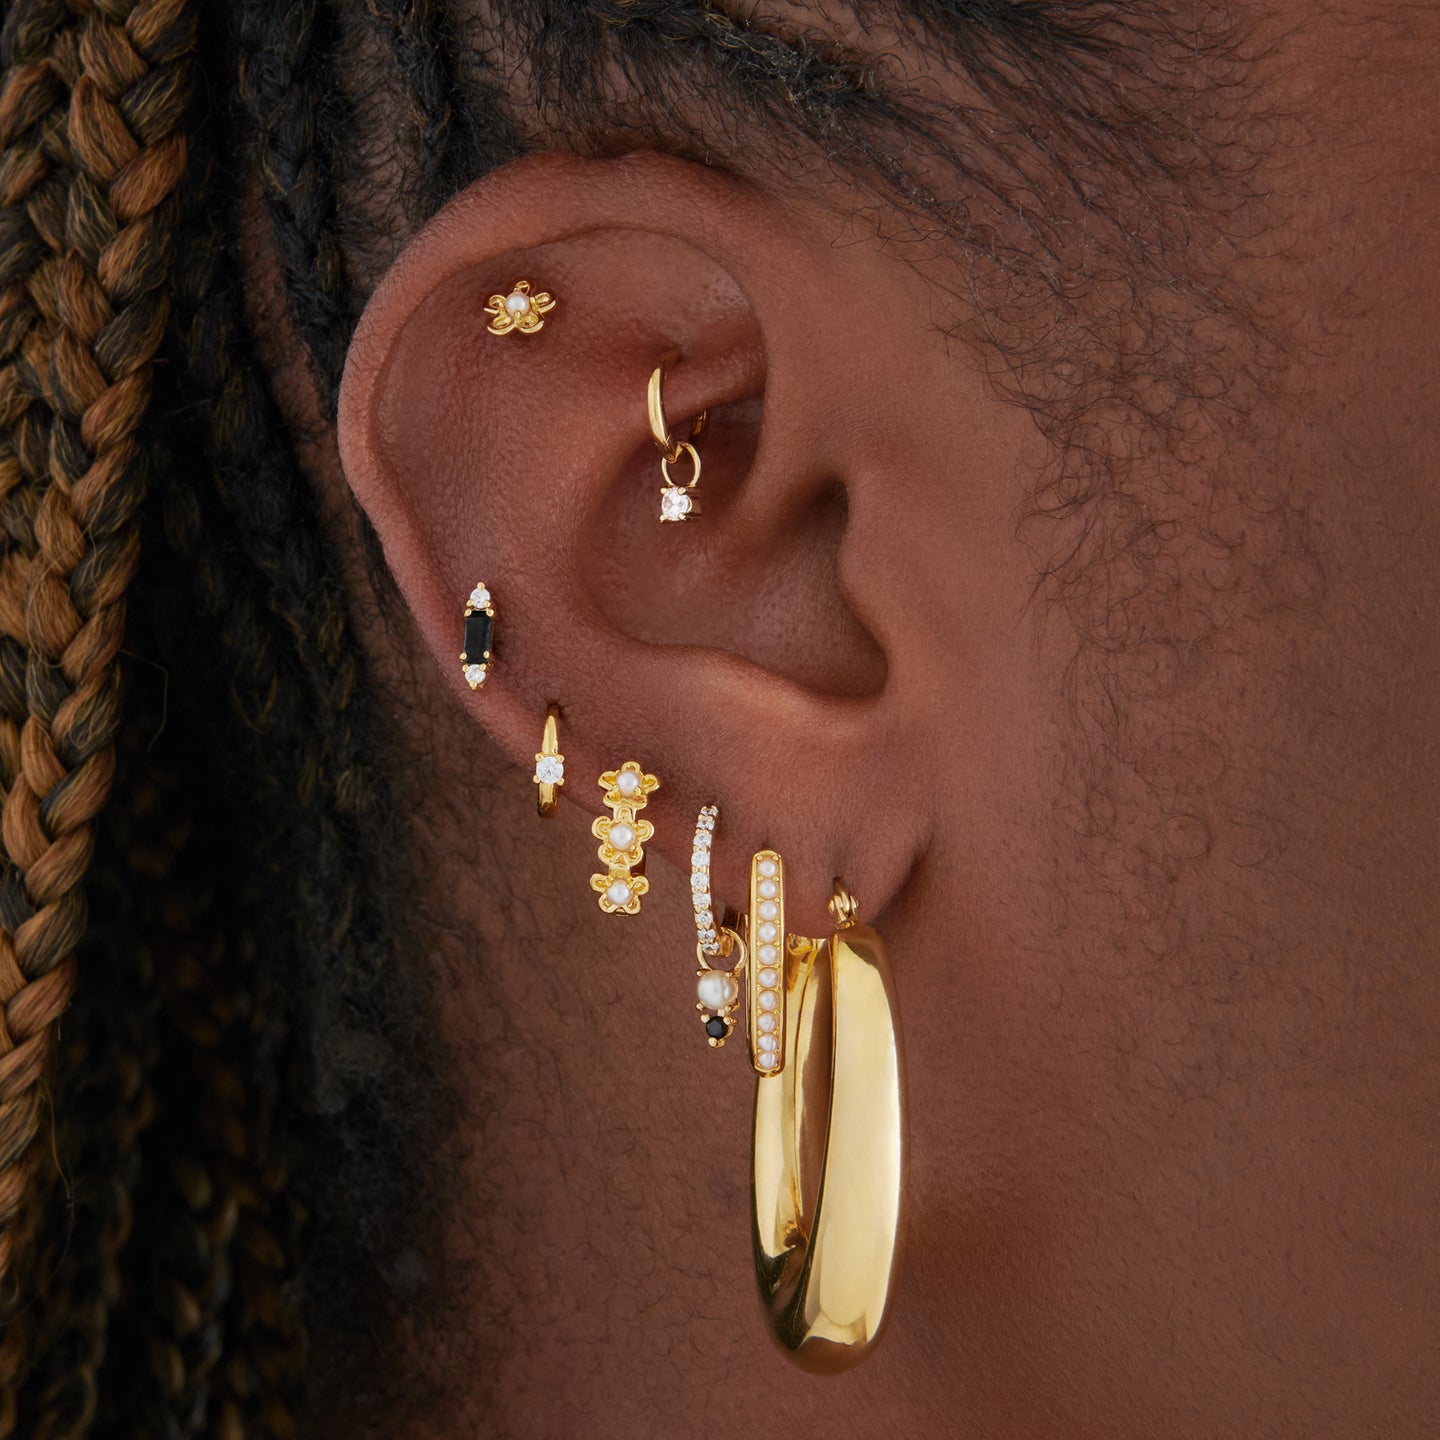 This is a gold, large, oval crescent shaped hoop on ear. [hover] color:null|gold